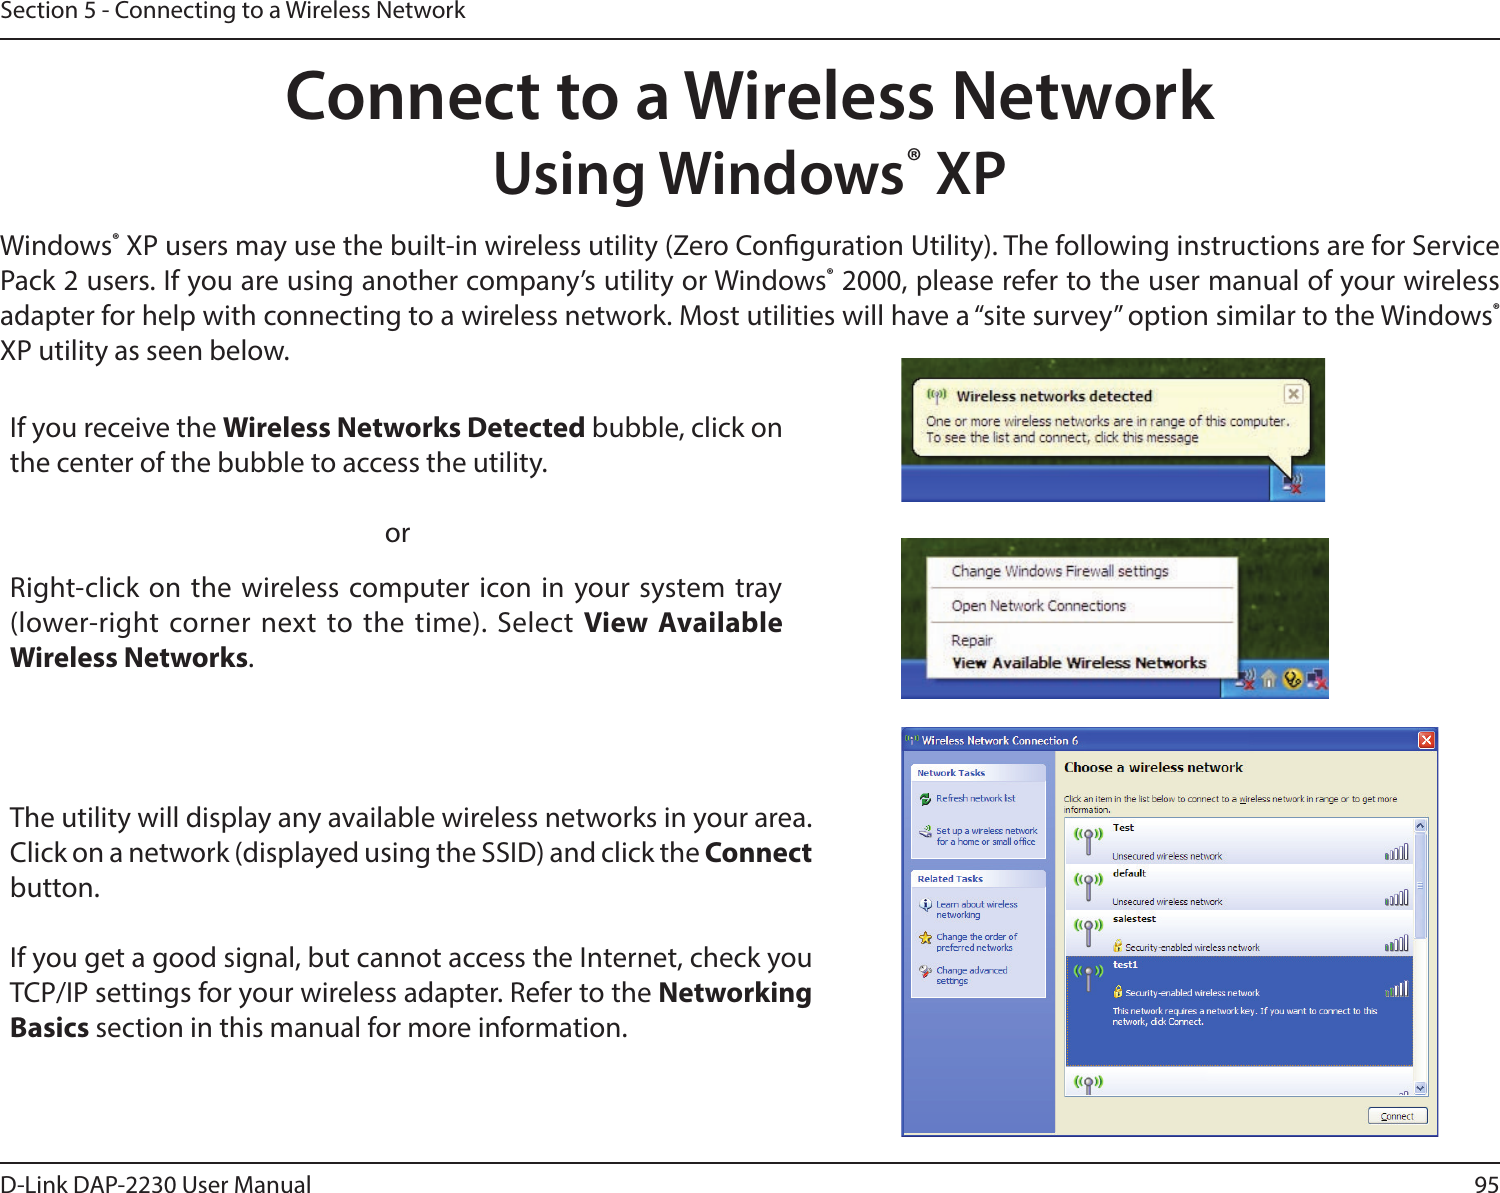 95D-Link DAP-2230 User ManualSection 5 - Connecting to a Wireless NetworkConnect to a Wireless NetworkUsing Windows® XPWindows® XP users may use the built-in wireless utility (Zero Conguration Utility). The following instructions are for Service Pack 2 users. If you are using another company’s utility or Windows® 2000, please refer to the user manual of your wireless adapter for help with connecting to a wireless network. Most utilities will have a “site survey” option similar to the Windows® XP utility as seen below.Right-click on the wireless computer icon in your system tray (lower-right corner next to the time). Select View Available Wireless Networks.If you receive the Wireless Networks Detected bubble, click on the center of the bubble to access the utility.     orThe utility will display any available wireless networks in your area. Click on a network (displayed using the SSID) and click the Connect button.If you get a good signal, but cannot access the Internet, check you TCP/IP settings for your wireless adapter. Refer to the Networking Basics section in this manual for more information.